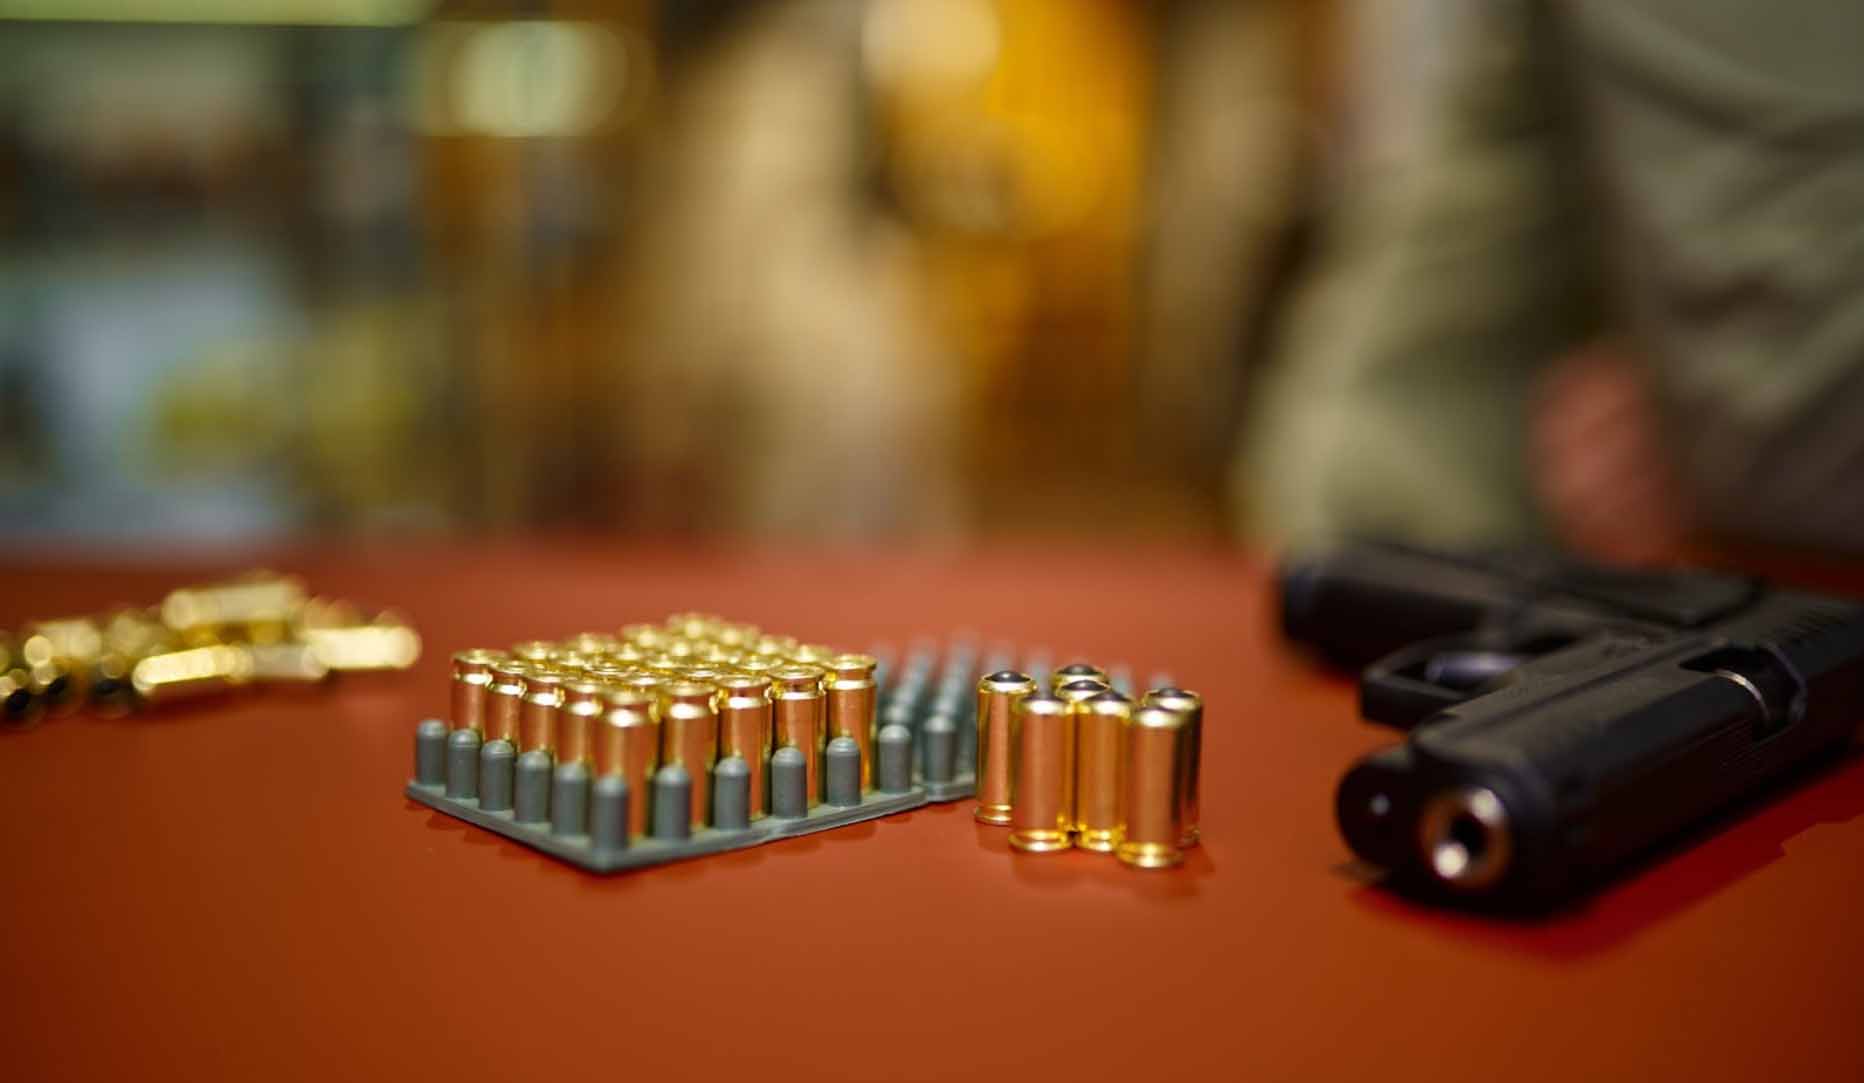 An assortment of bullets lying next to a firearm on a table.